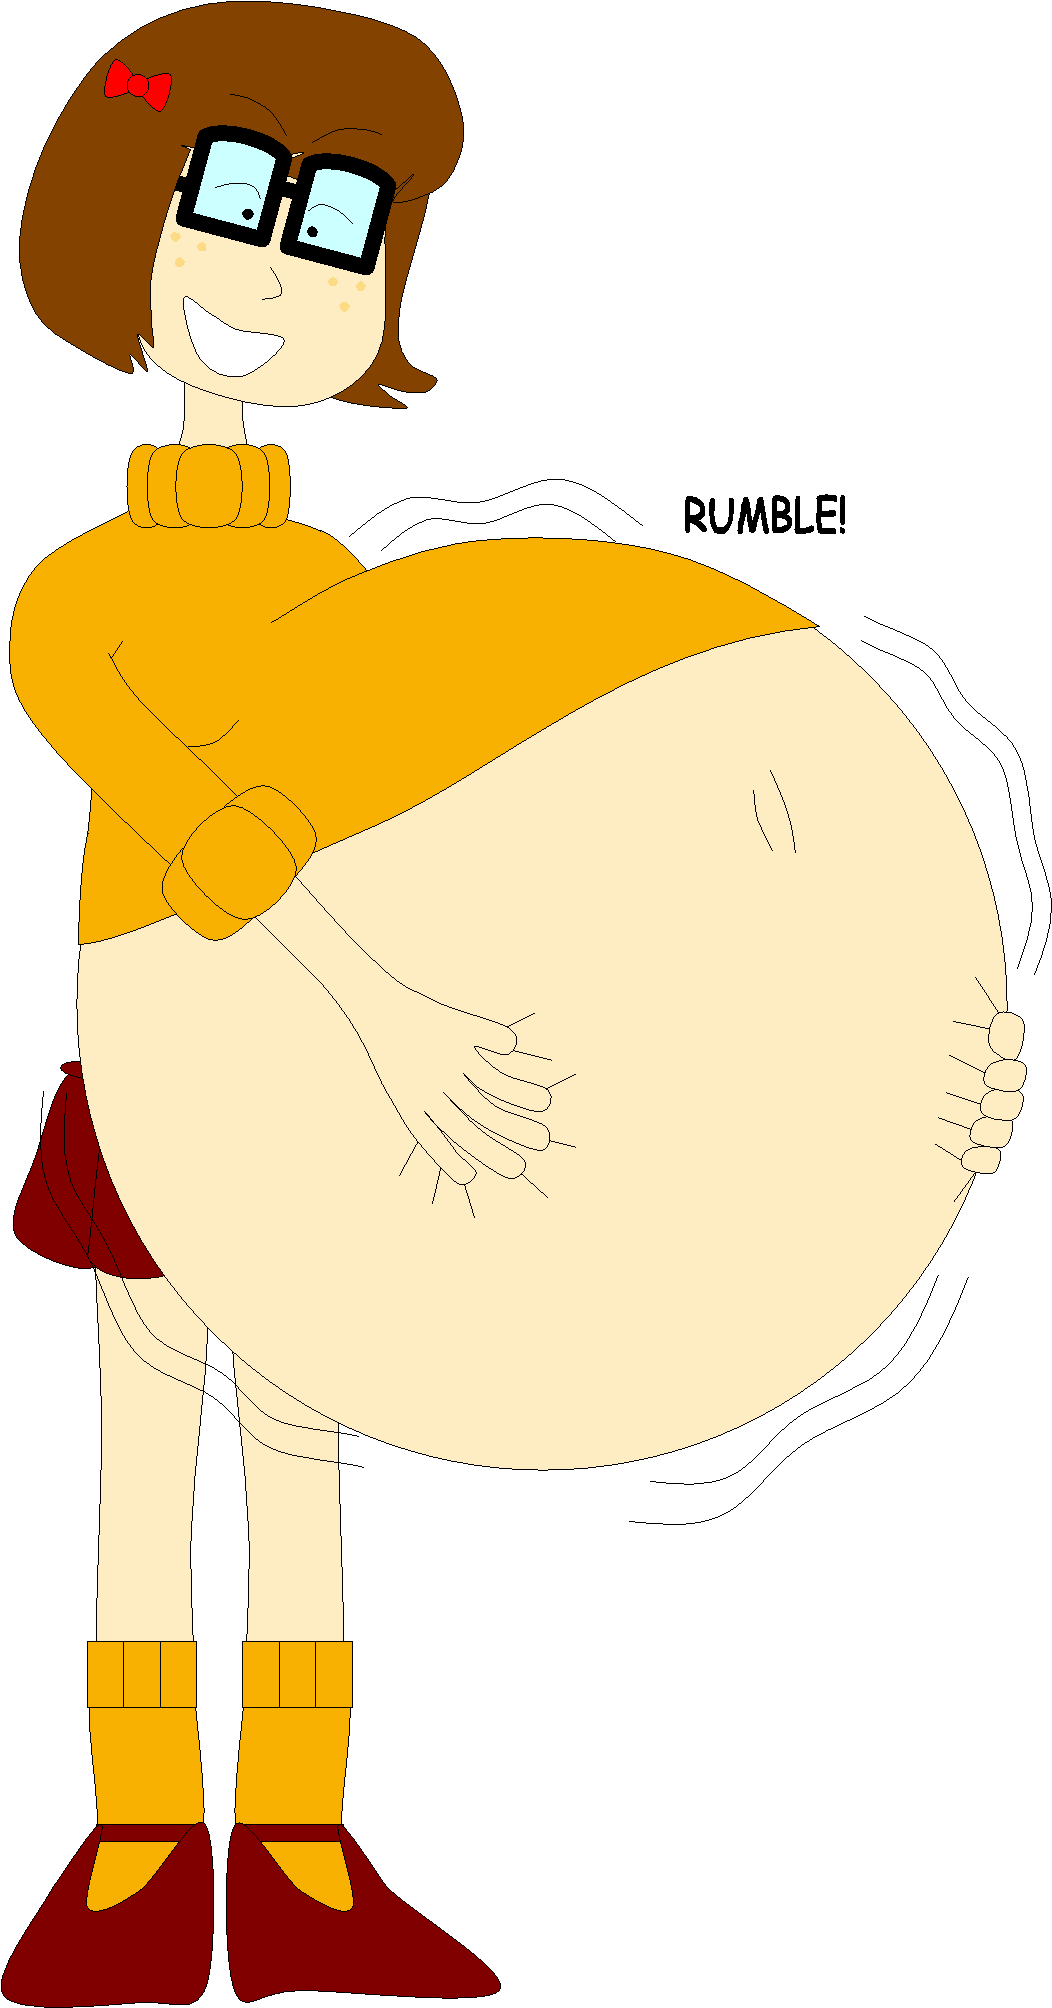 Velma's Belly After Eating Too Much By Angry-signs - After Eating Too Much (1249x2034)